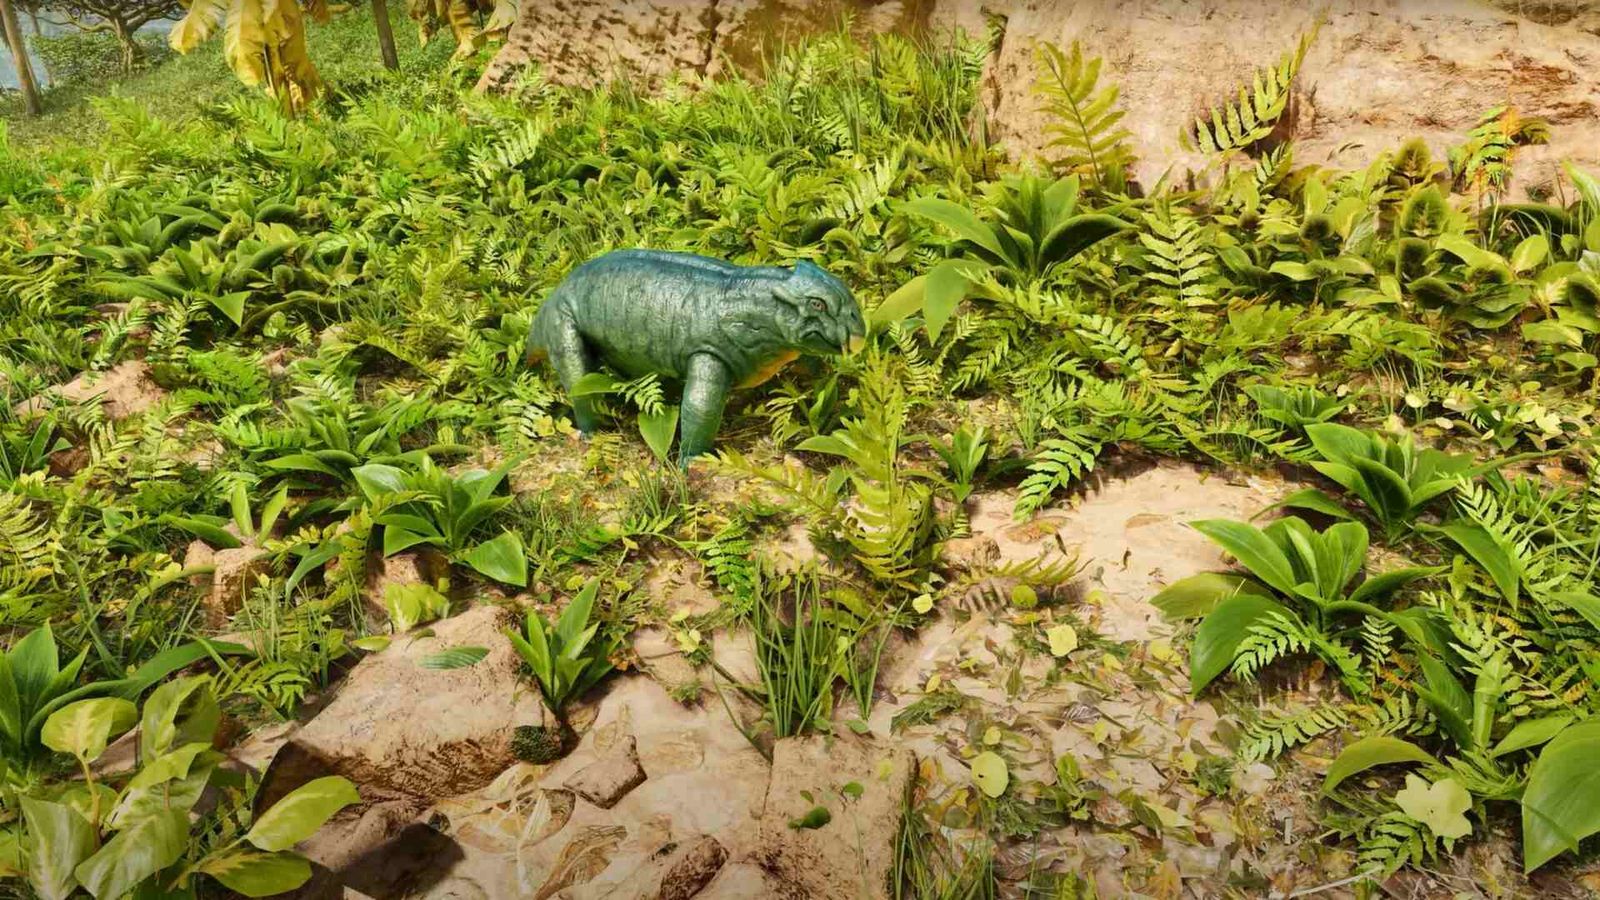 A screenshot from Ark: Survival Ascended showing a small dinosaur in the grass.